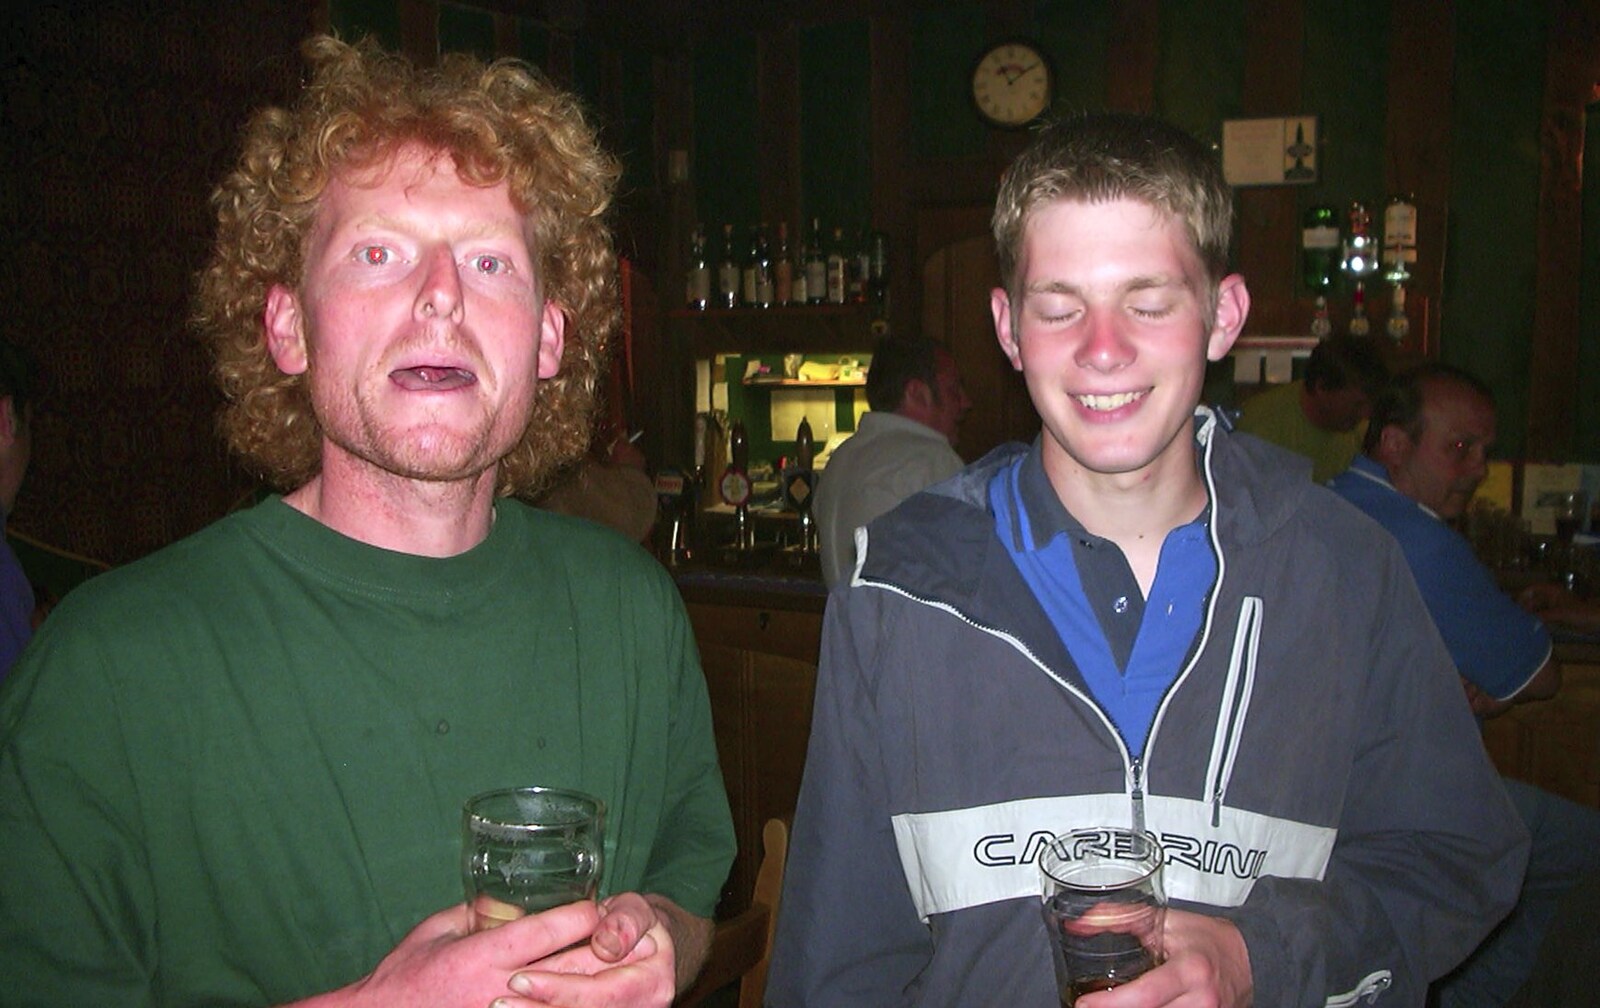 Wavy and The Boy Phil from The BSCC at Laxfield and Hoxne, Suffolk - 2nd May 2002